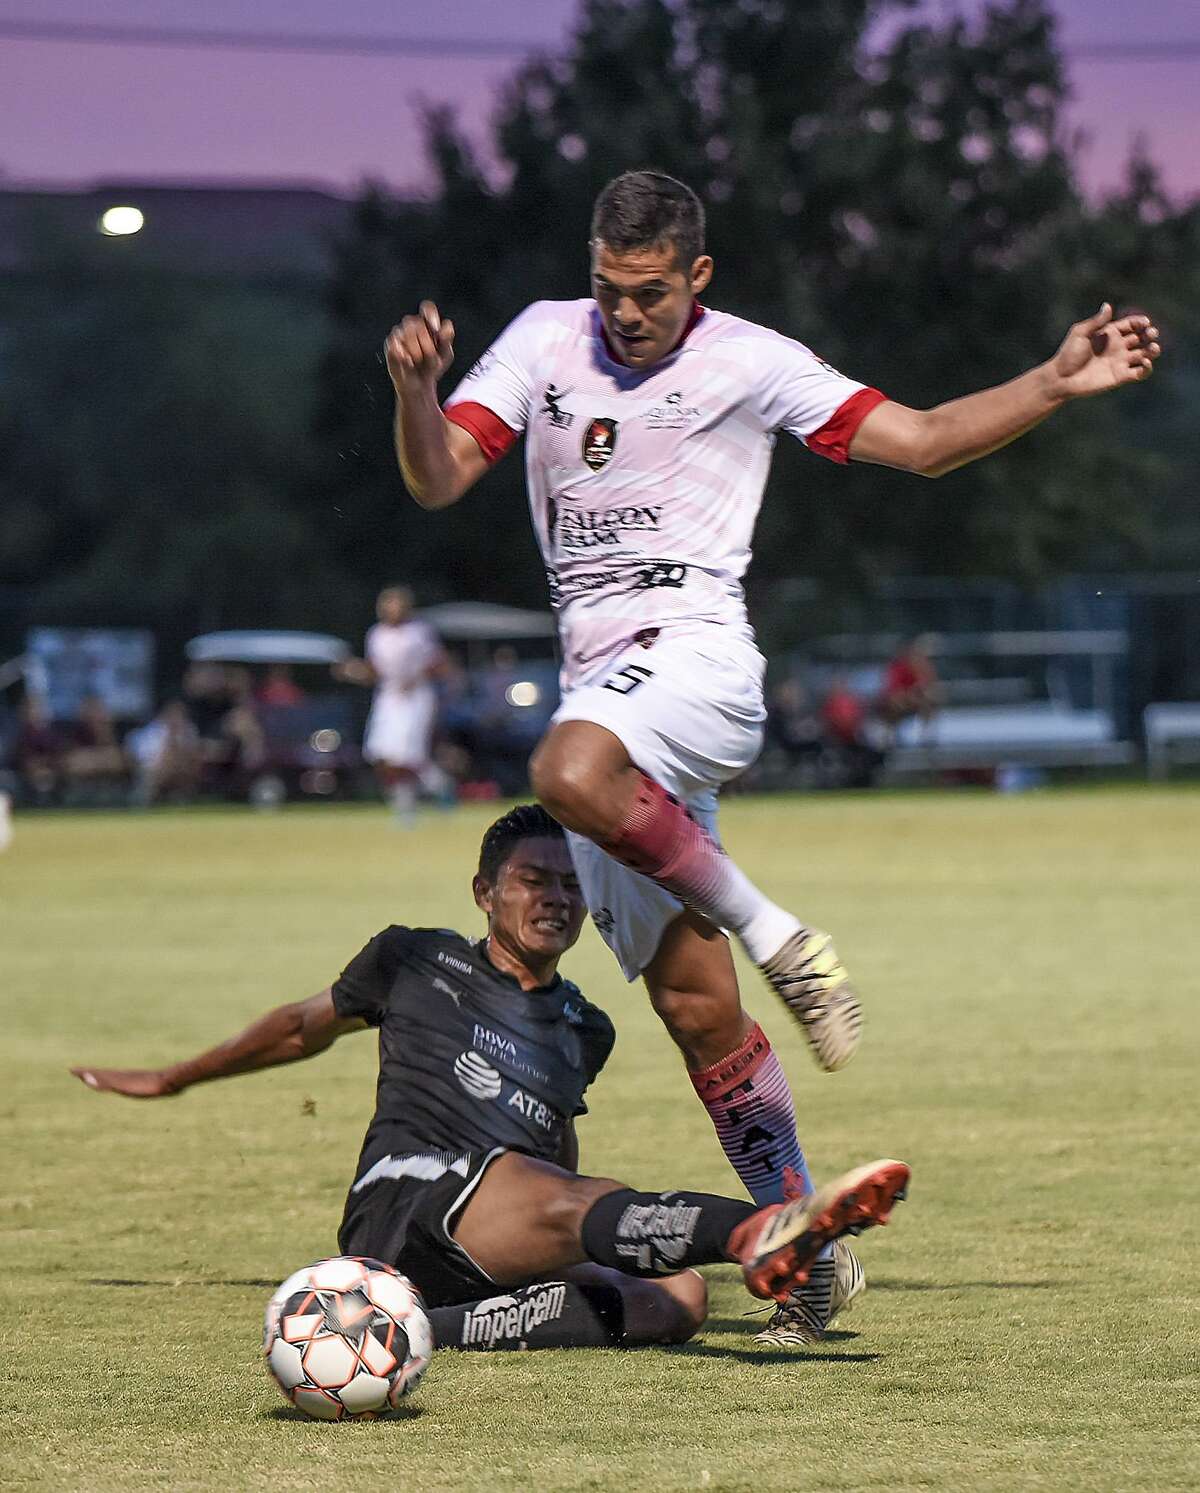 Jose Luis Hincapie and the Laredo Heat fell 1-0 at home Friday in a friendly against the Monterrey Rayados U20 team.